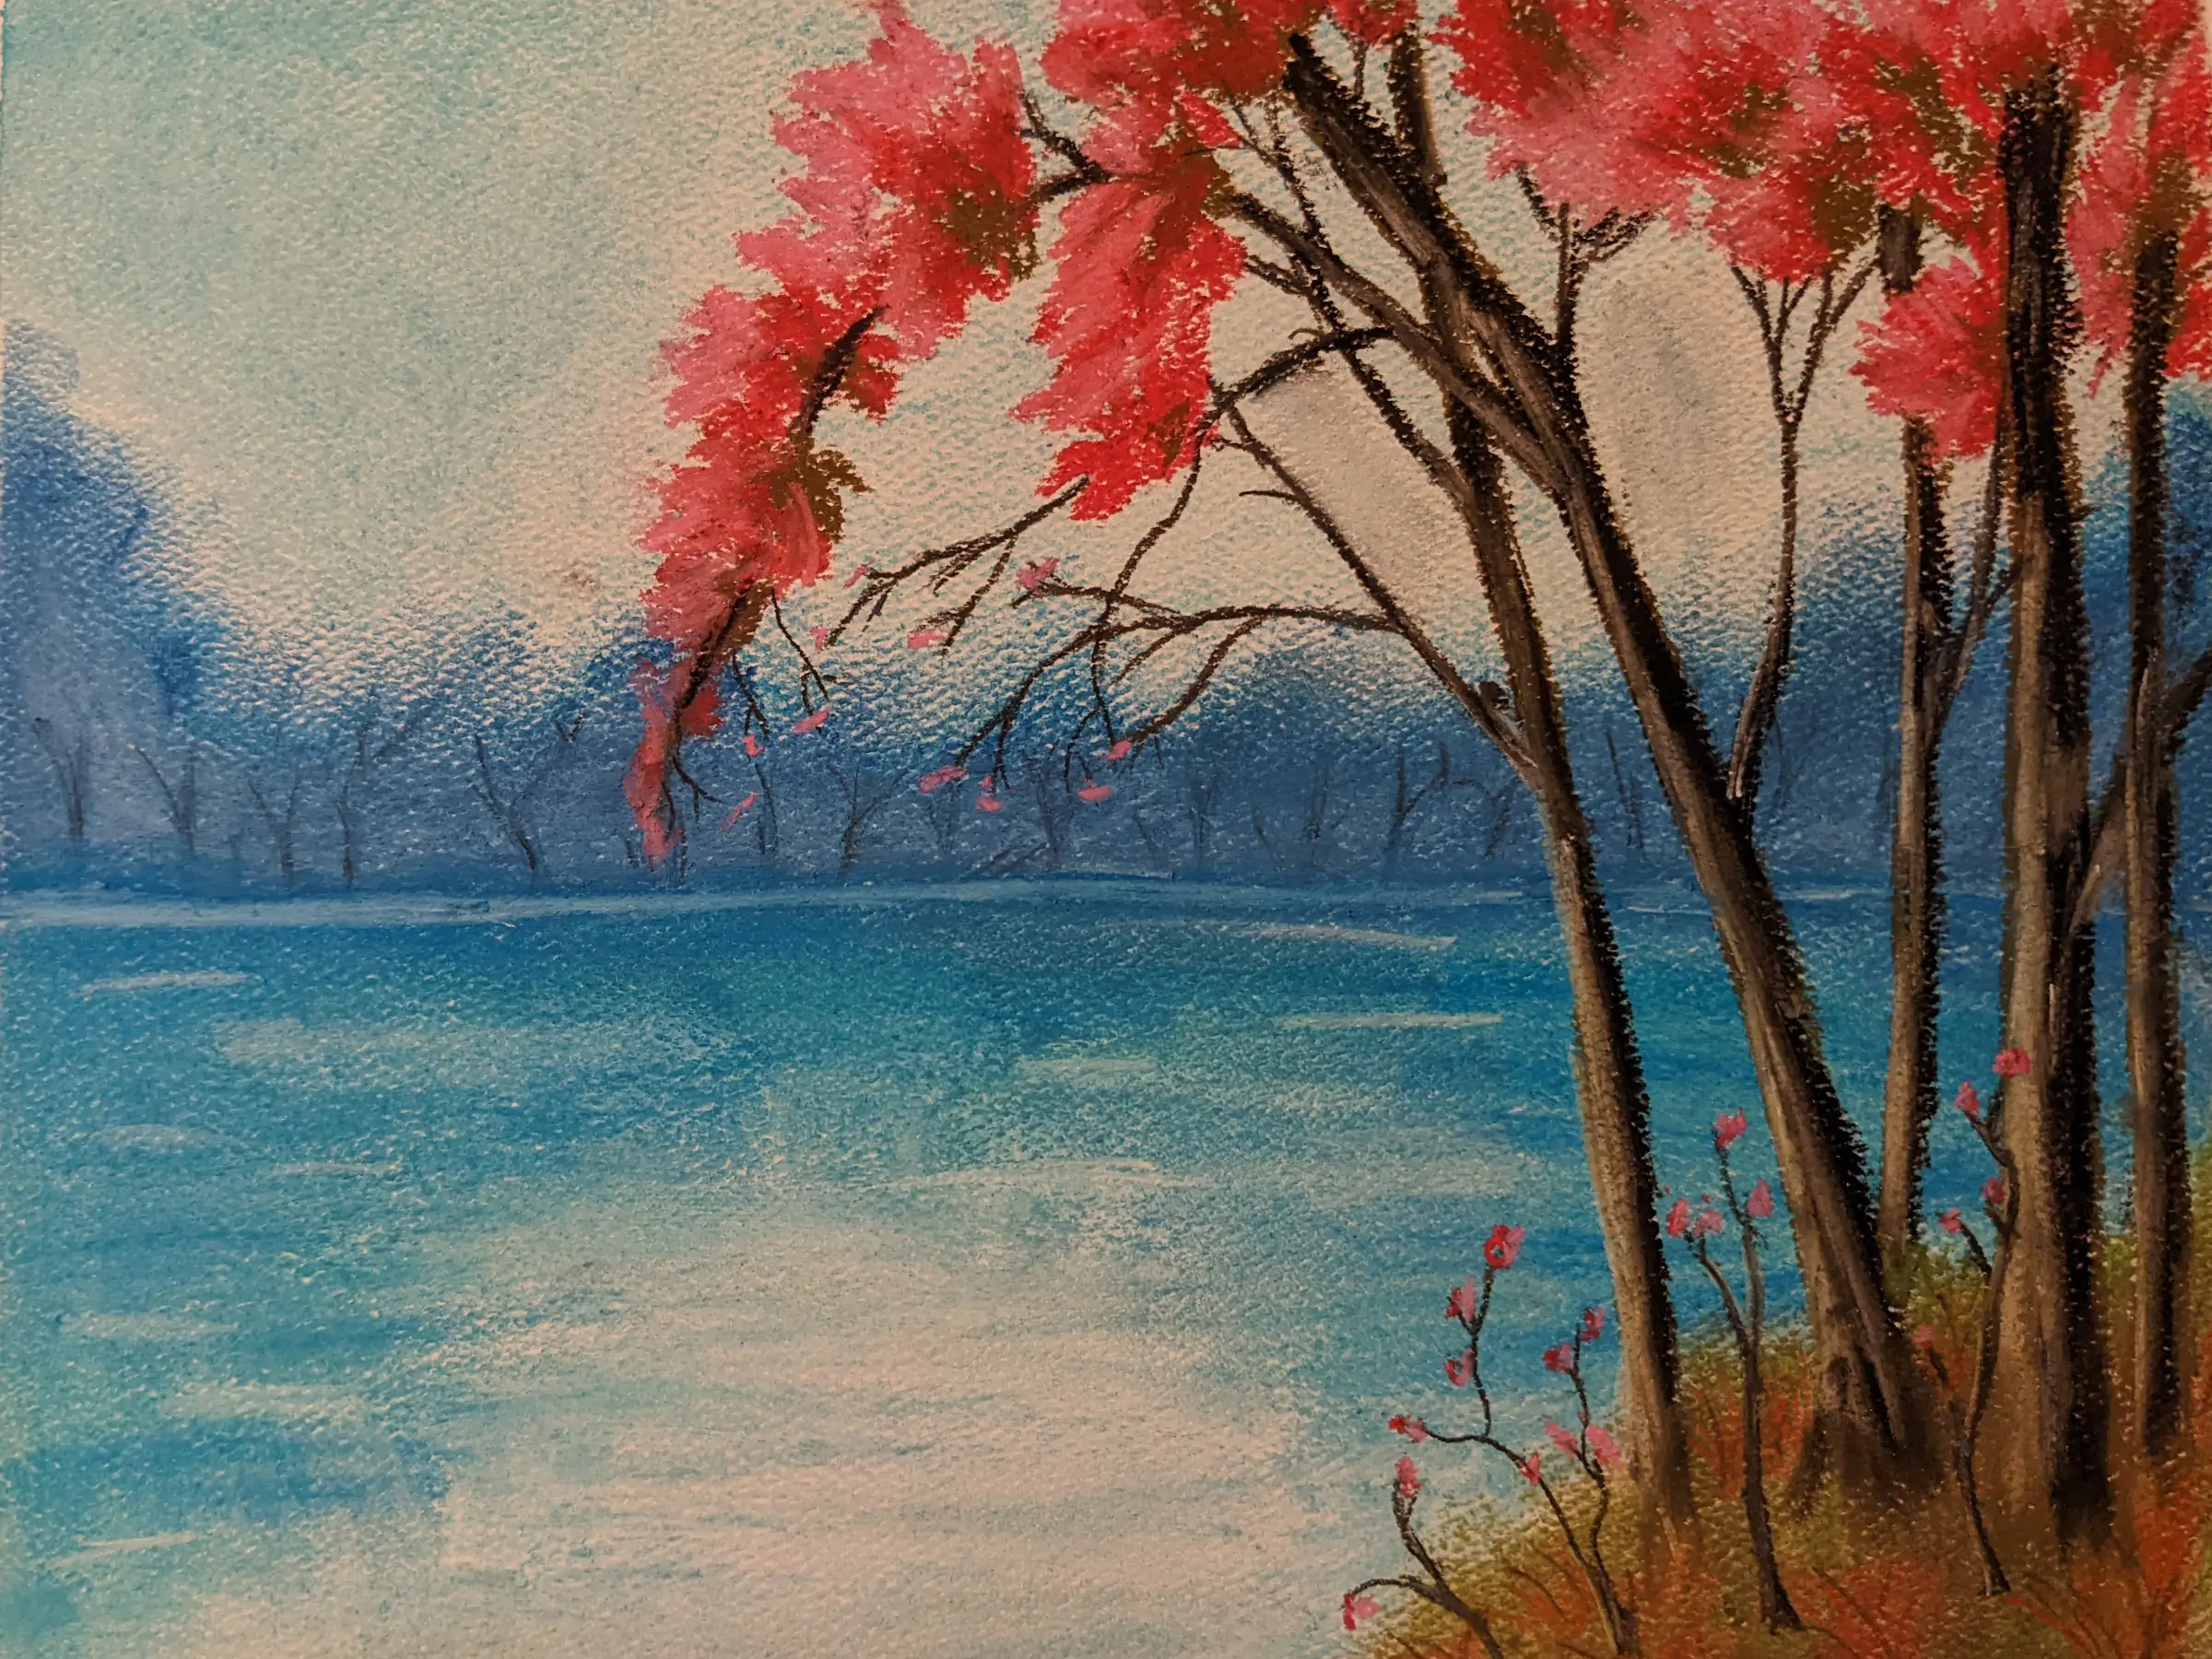 Cherry blossoms trees overhanging the edge of a lake, drawn in soft pastels..